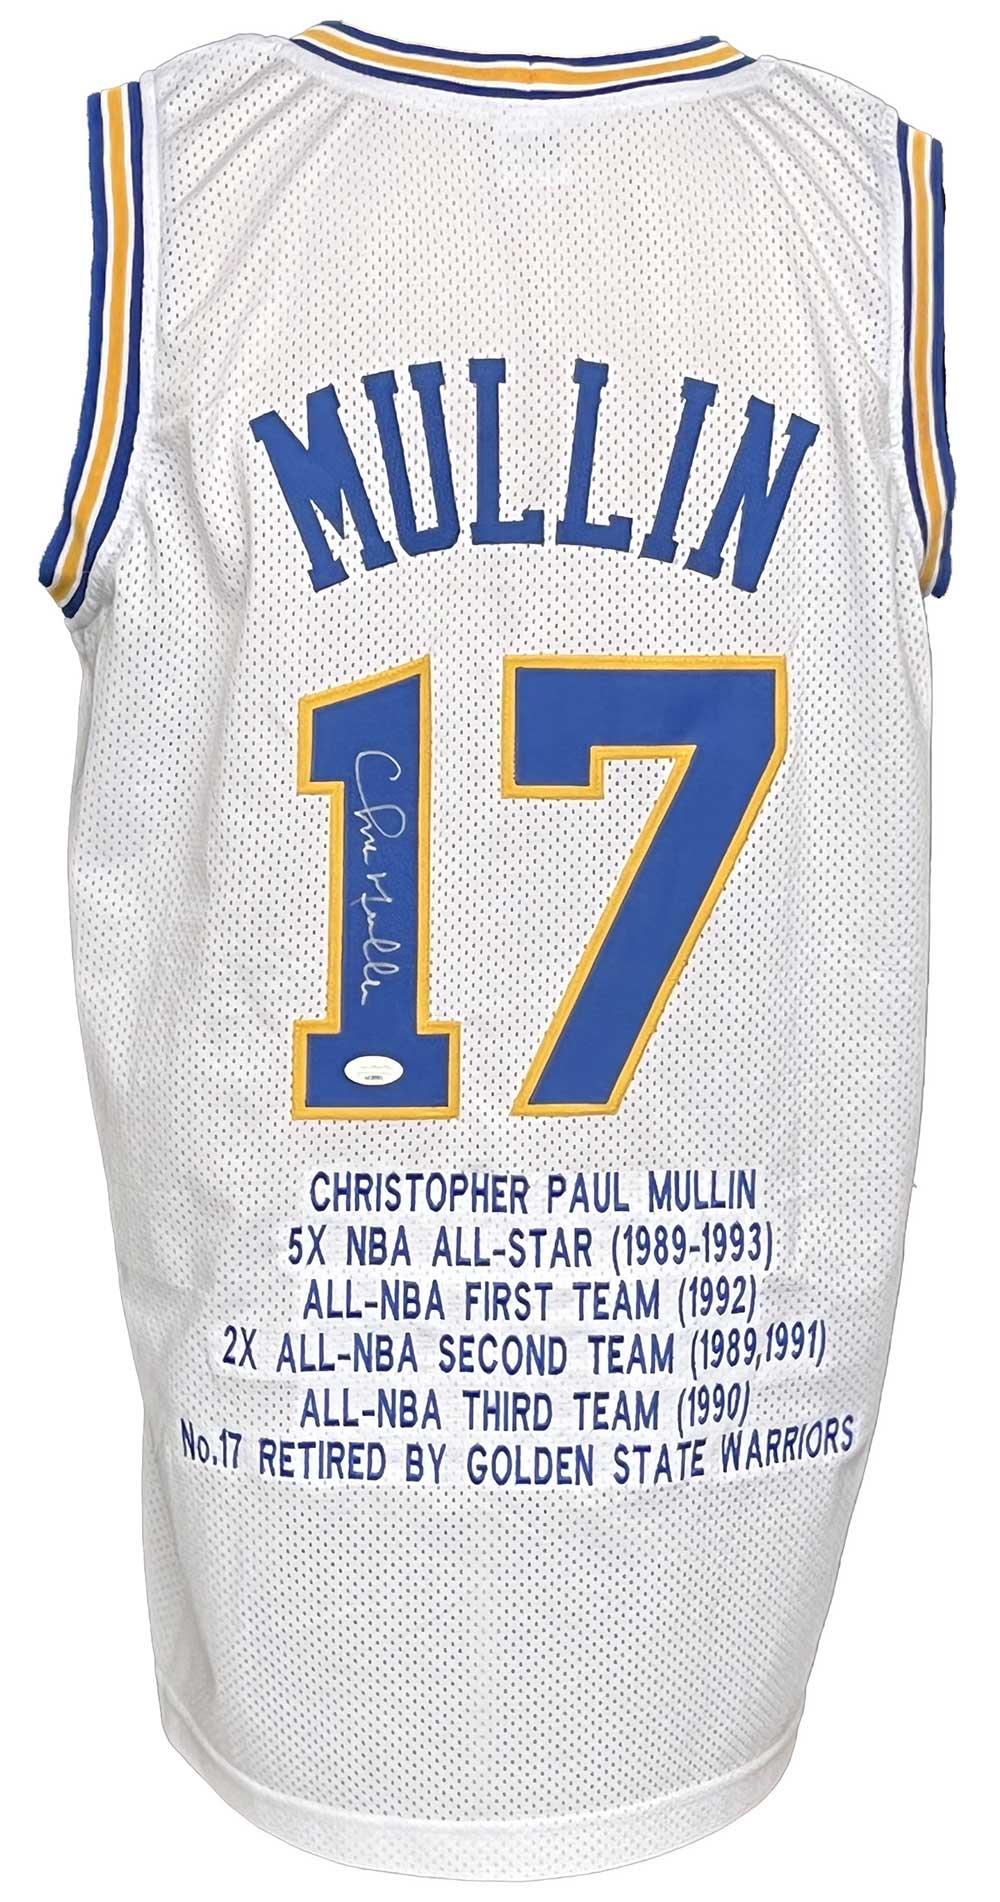 A framed jersey from Golden State Warriors player Chris Mullin is